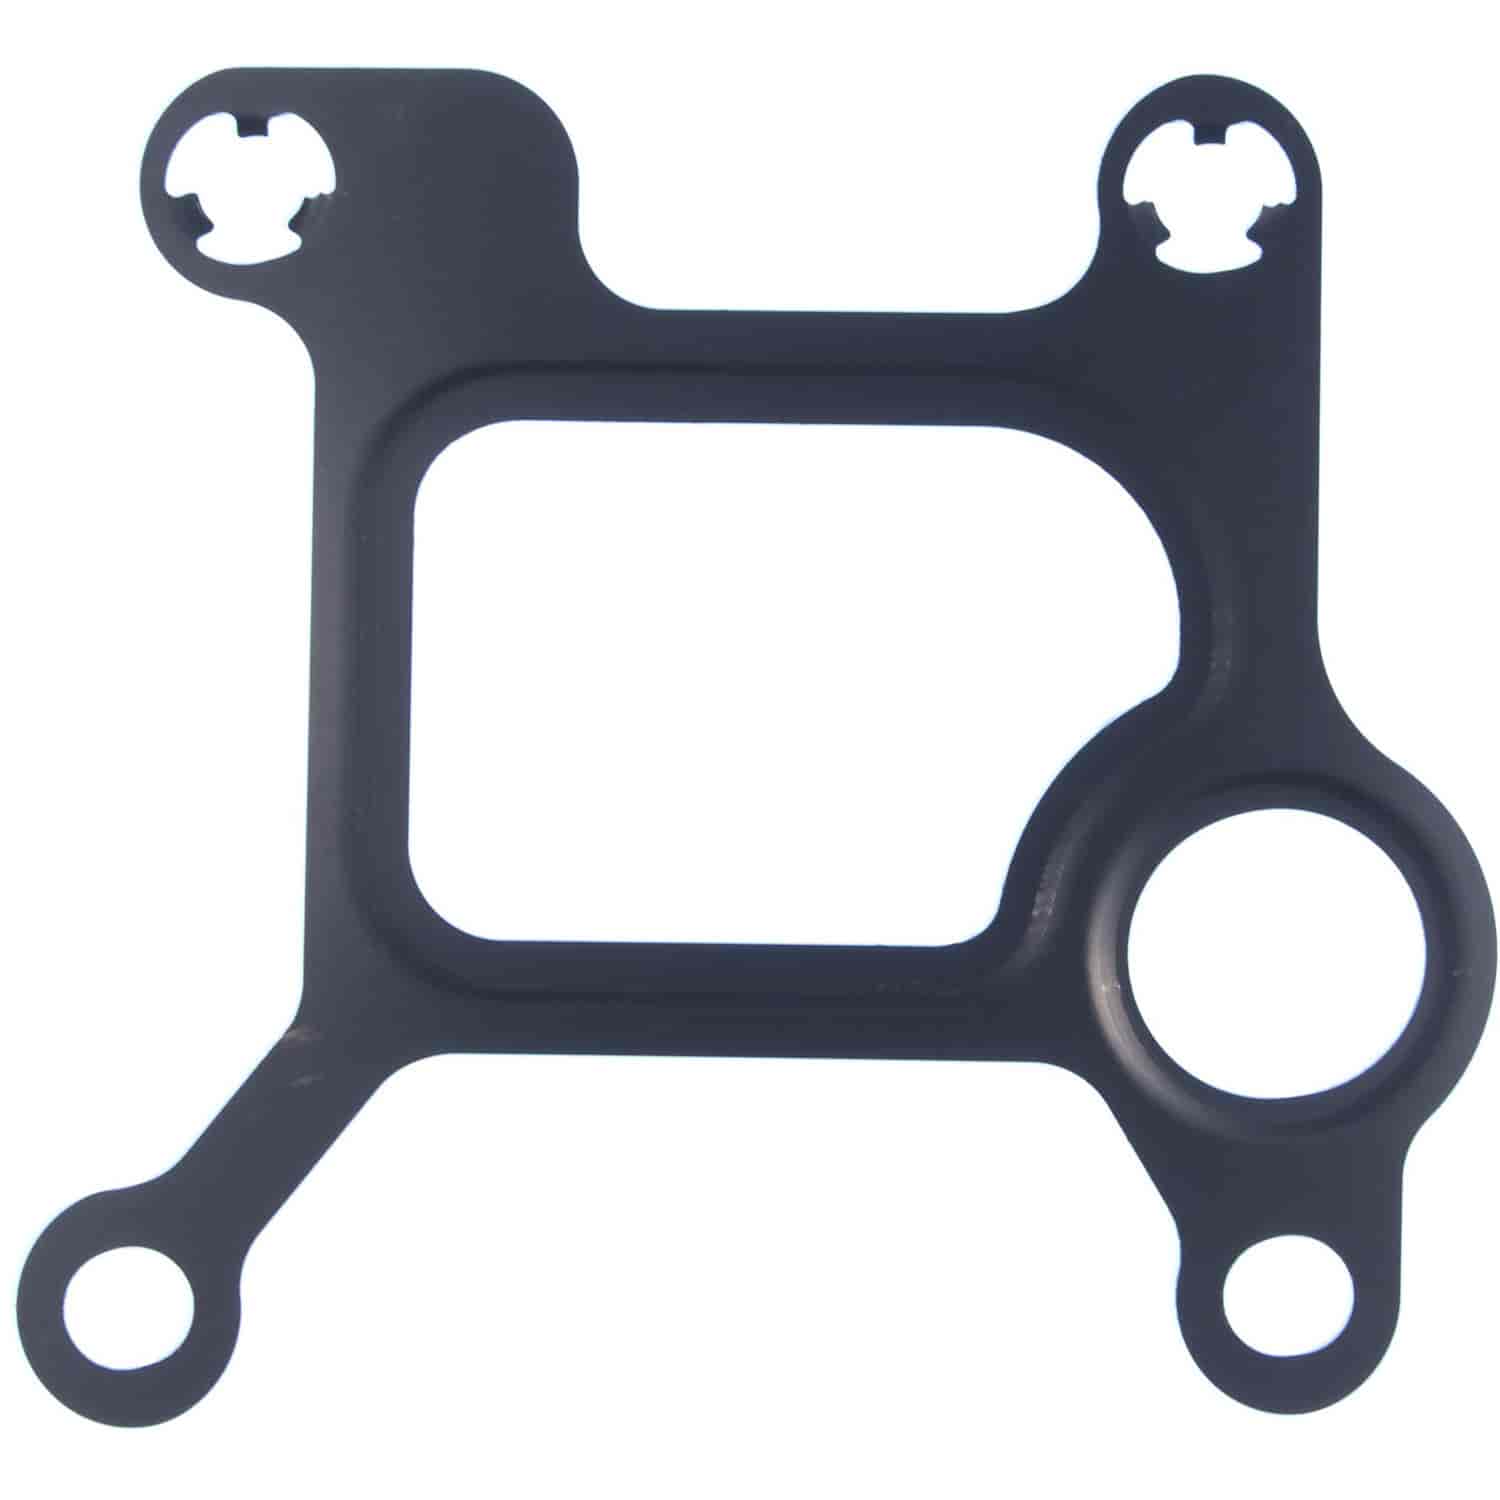 Water Outlet Gasket Mazda 2.3L 2006-2010 MZR Turbocharged